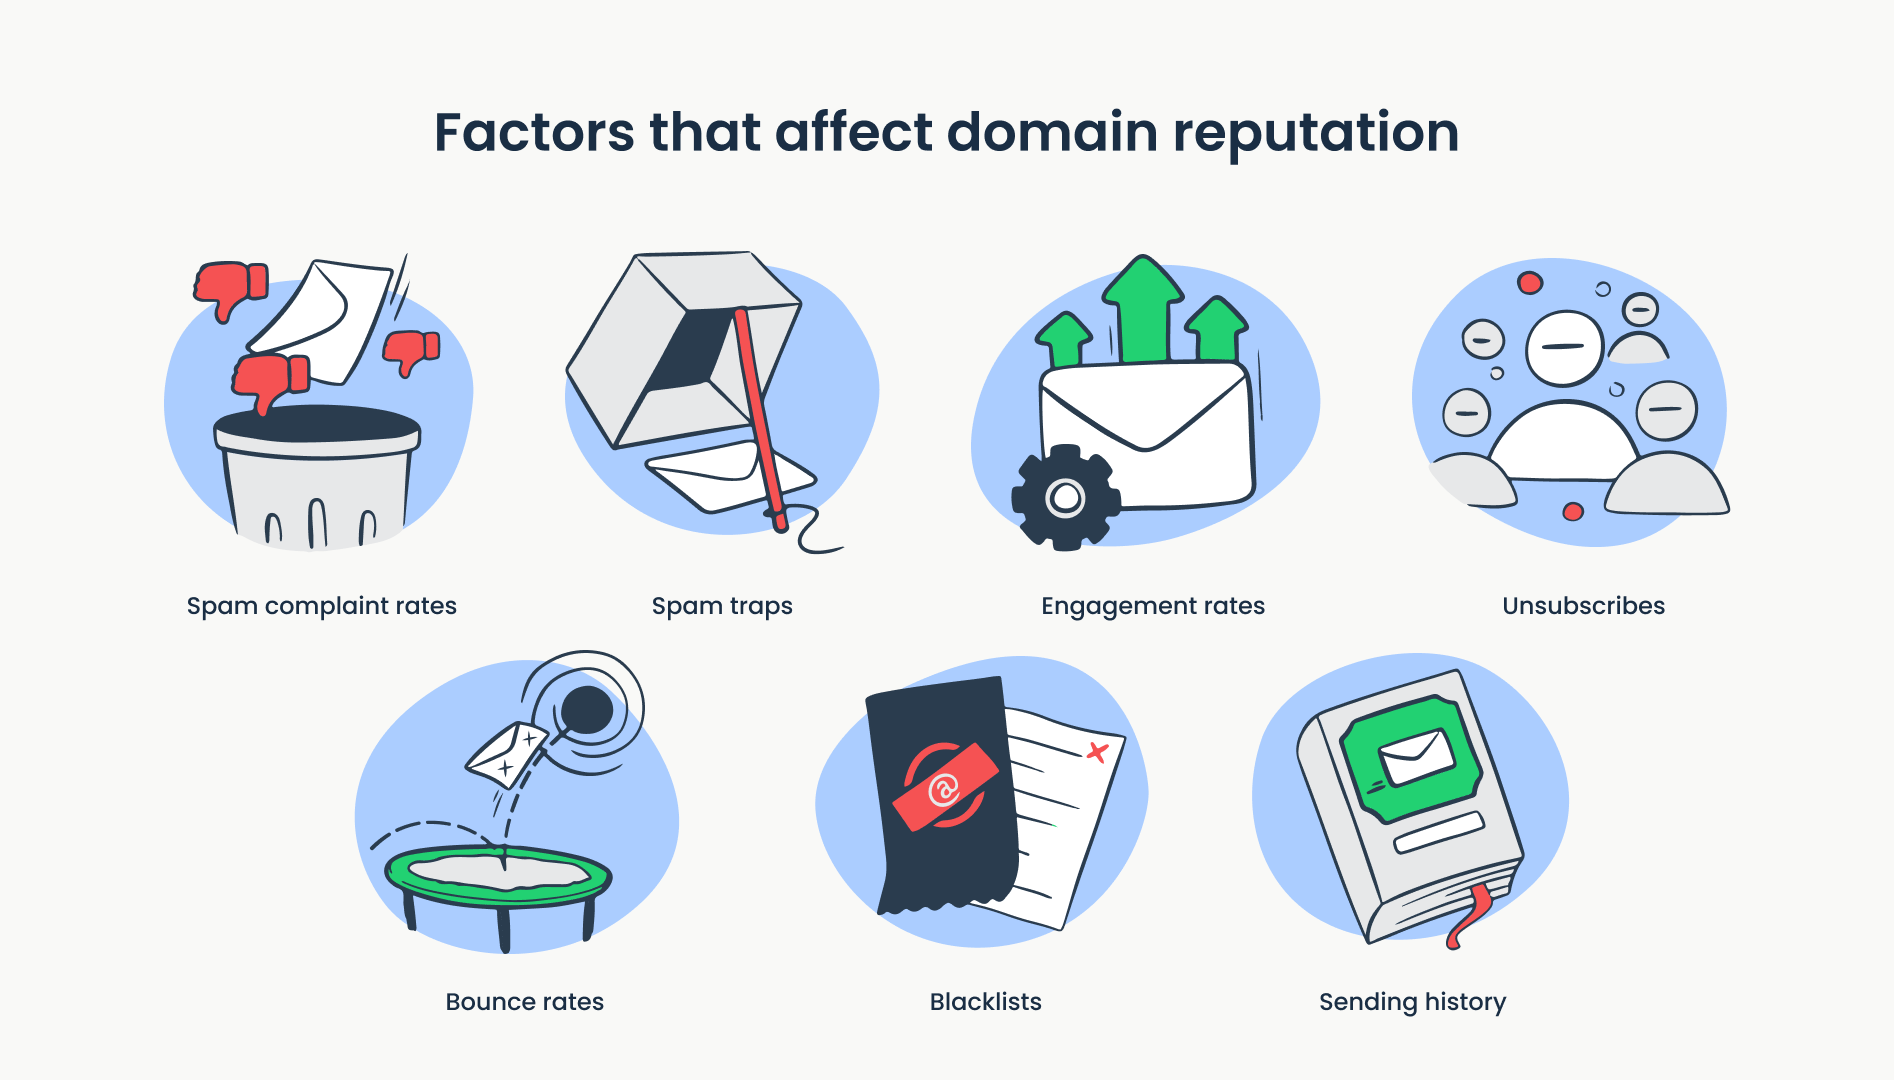 Factors that affect email domain reputation: spam complaint rates, spam traps, engagement rates, unsubscribed, bounce rates, blacklists, sending history